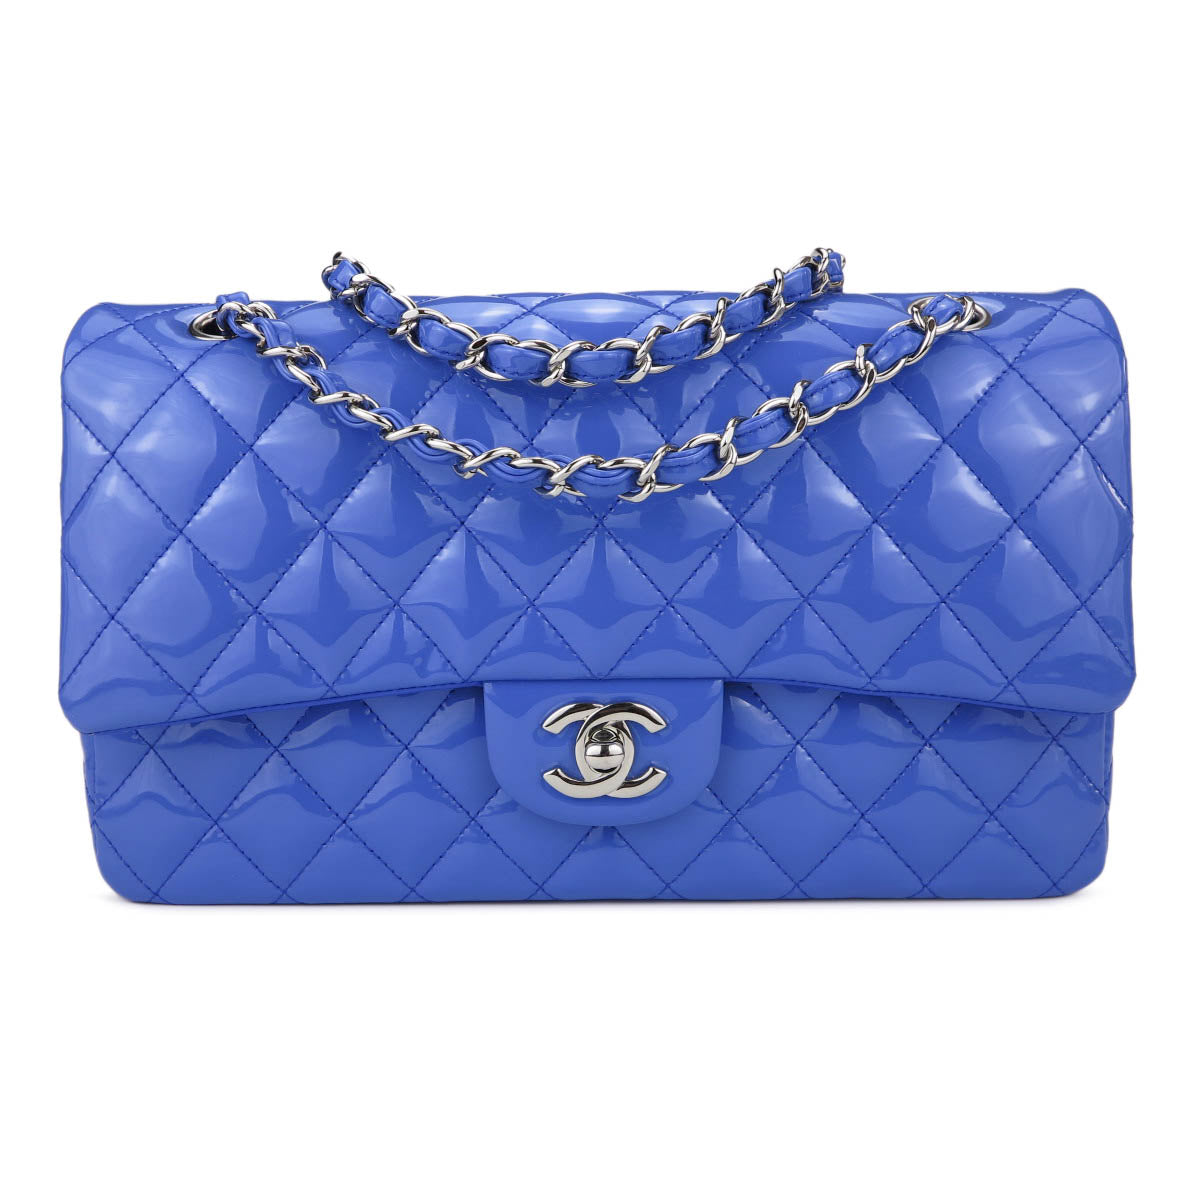 Chanel Blue Patent Leather Mini Flap Bag with Gunmetal Hardware